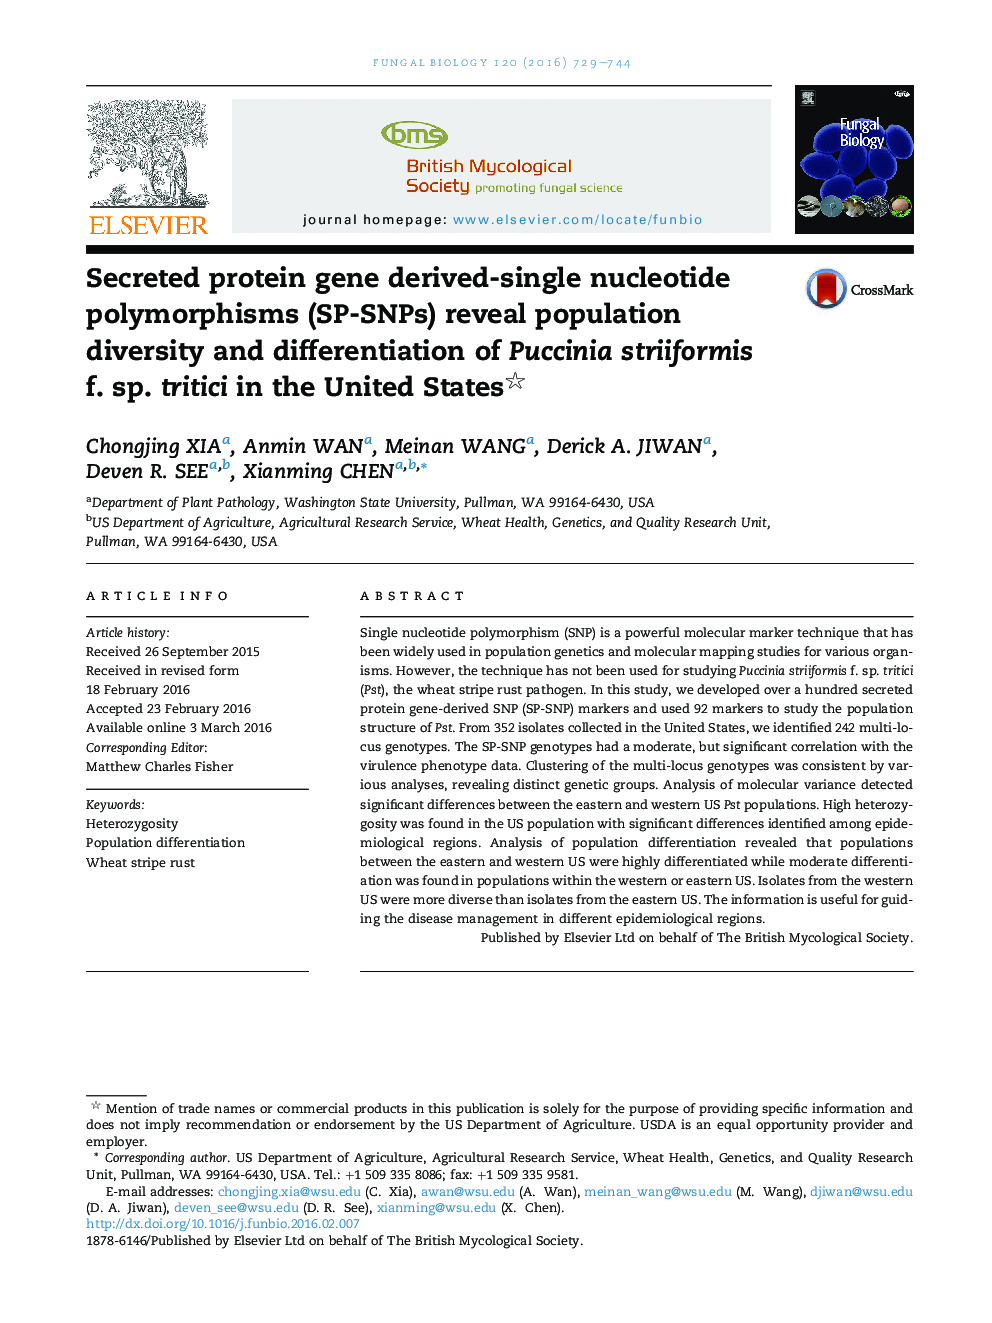 Secreted protein gene derived-single nucleotide polymorphisms (SP-SNPs) reveal population diversity and differentiation of Puccinia striiformis f. sp. tritici in the United States